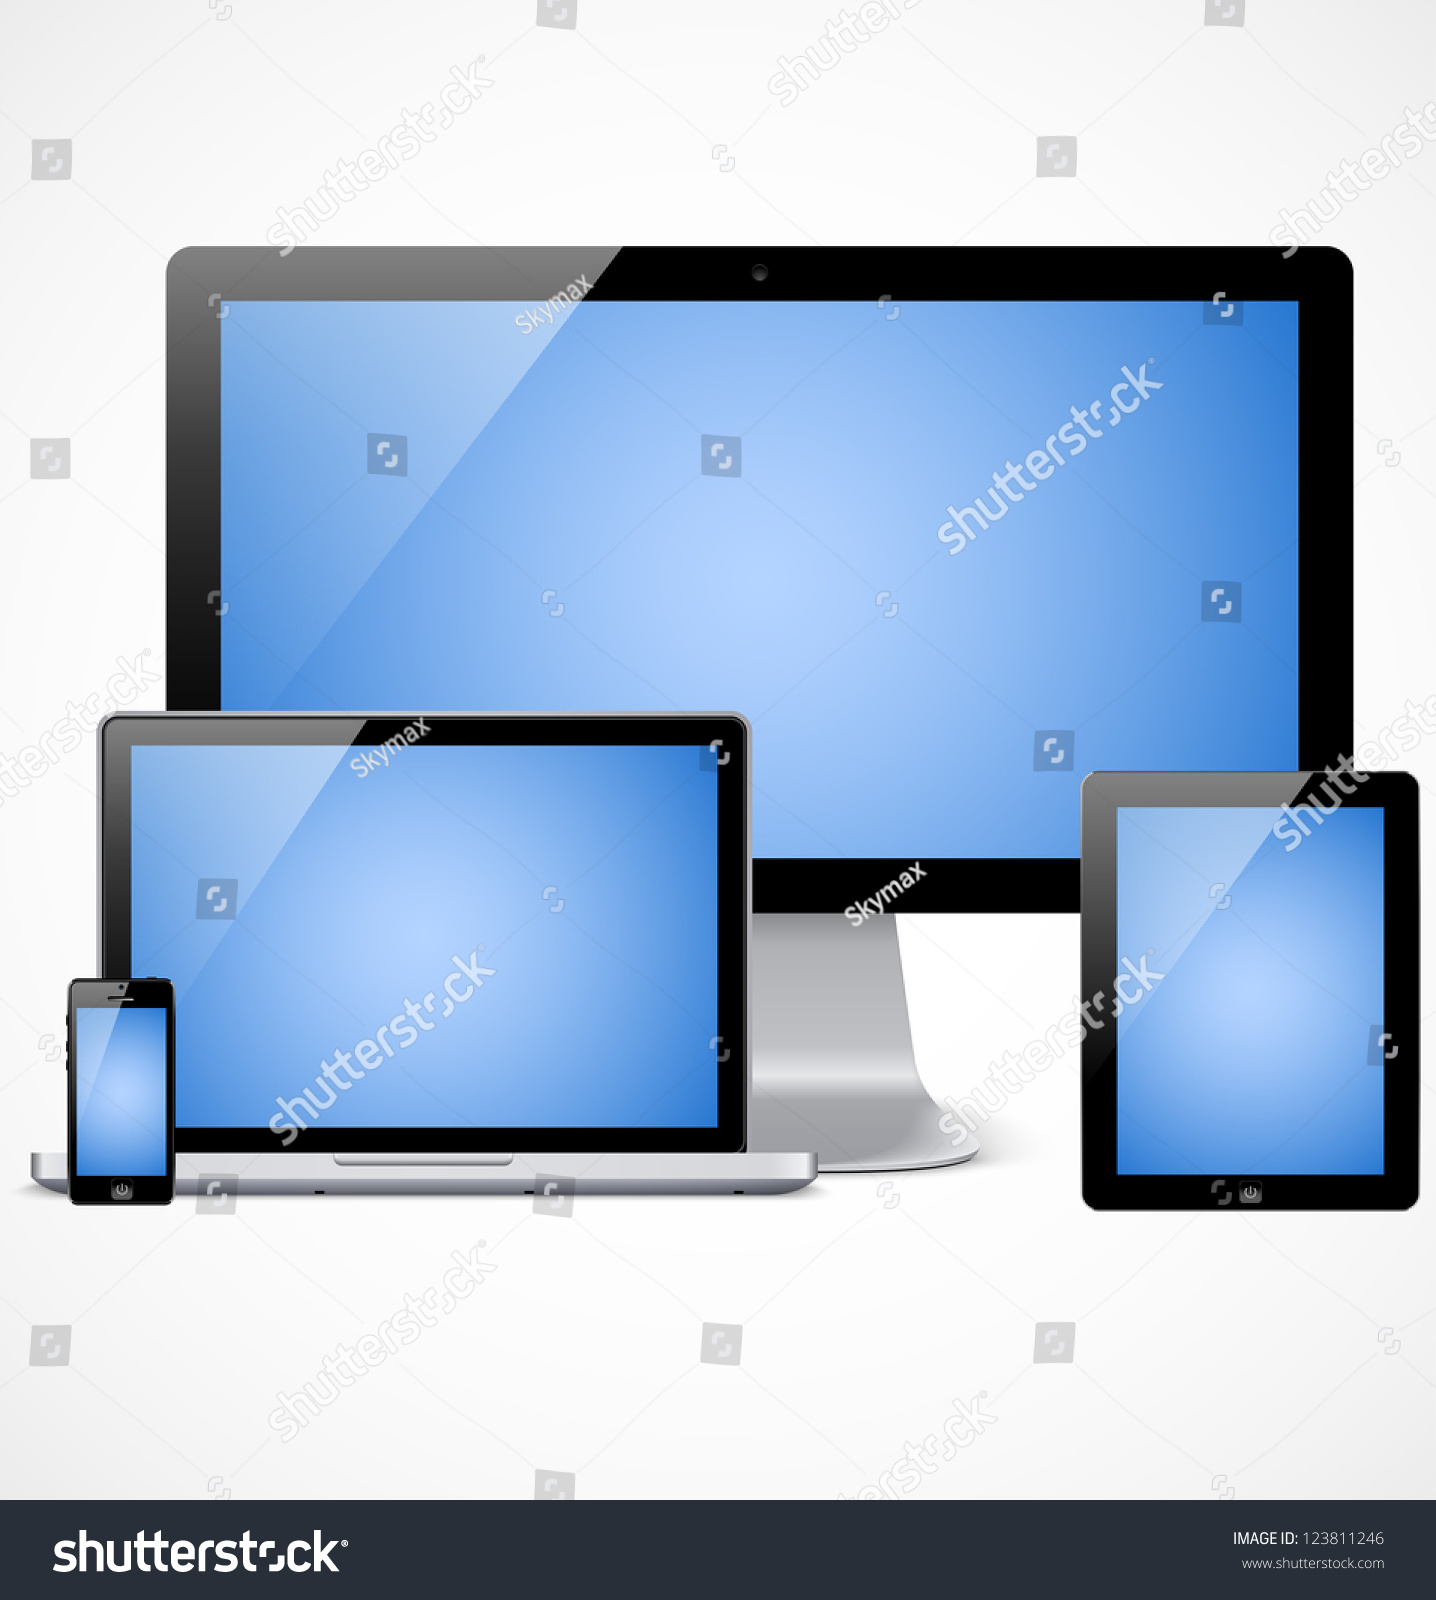 phone tablet clipart - photo #28